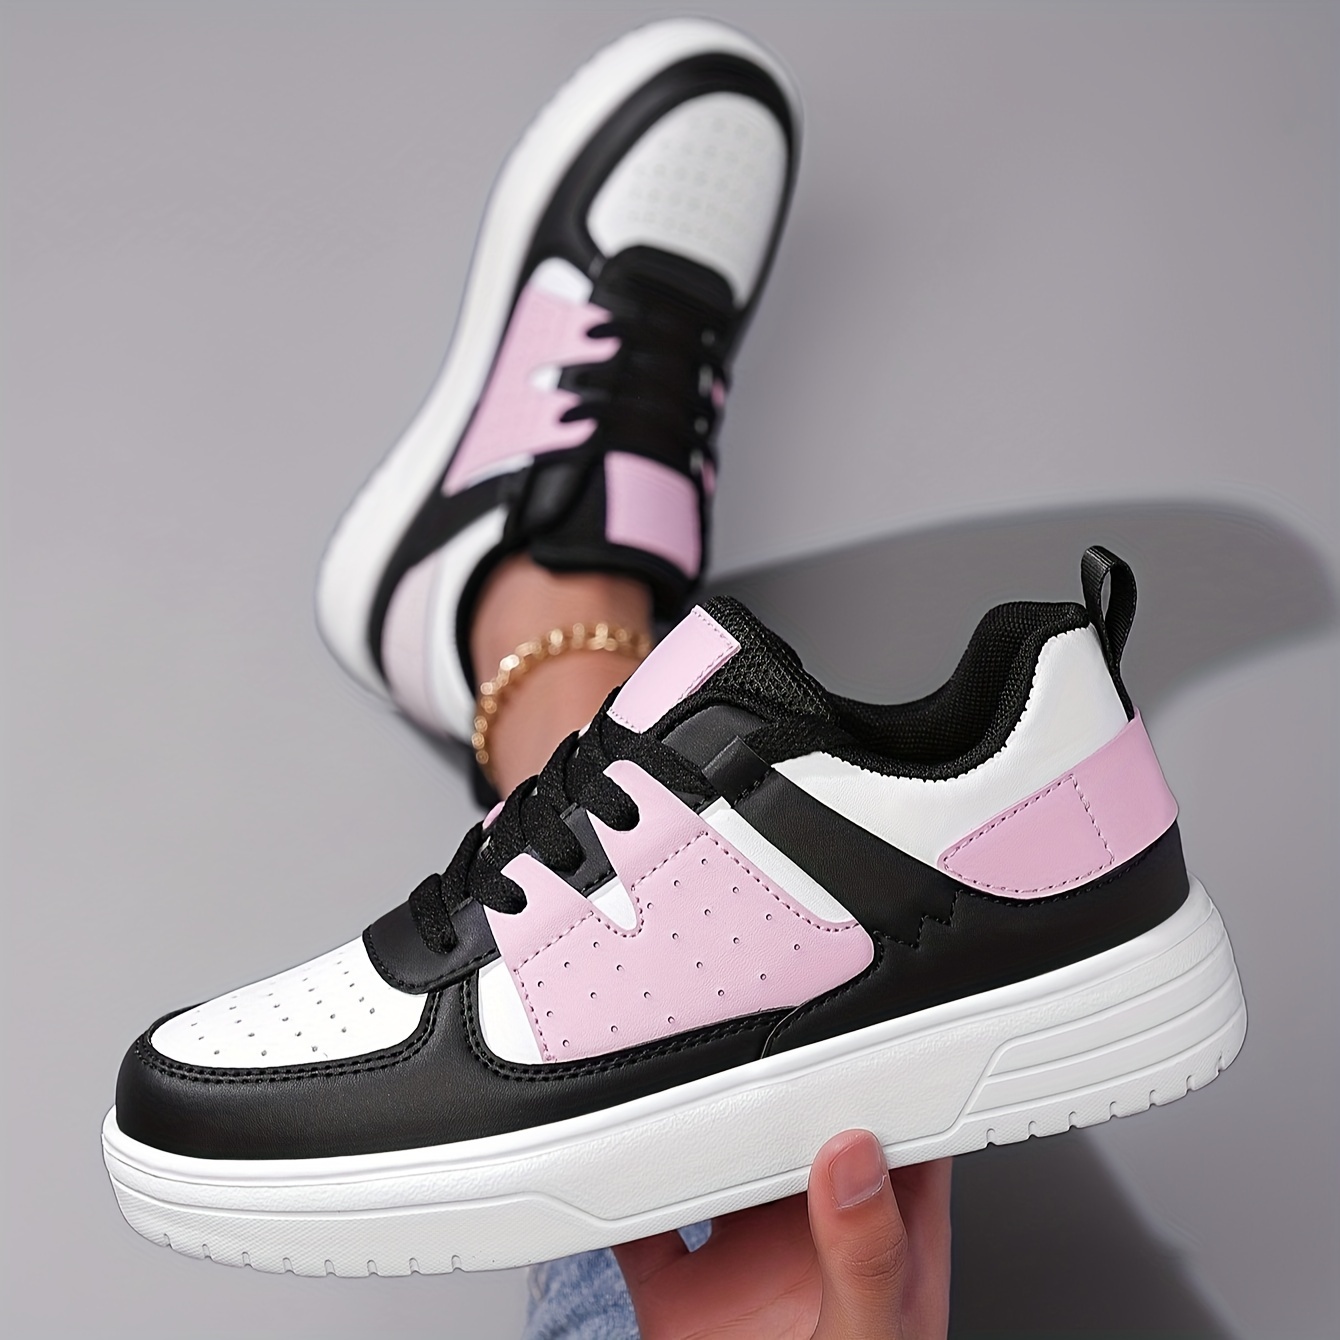 

Women's Colorblock Casual Sneakers, Lace Up Platform Soft Sole Walking Skate Shoes, Low-top Breathable Trainers